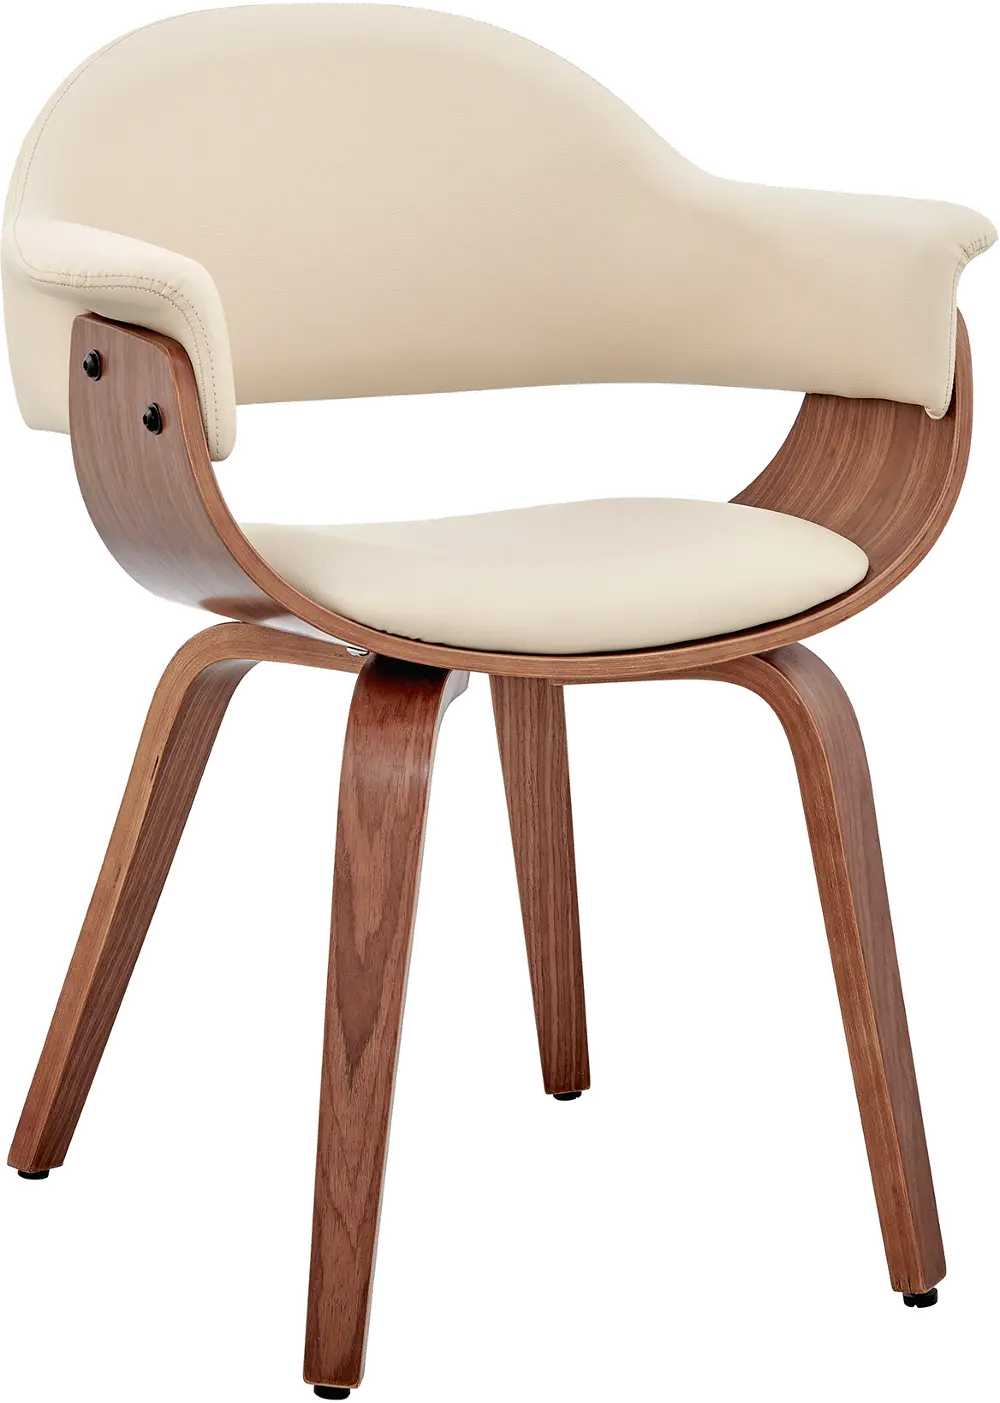 LCADCHWACR Adalyn Cream and Walnut Dining Room Chair-1